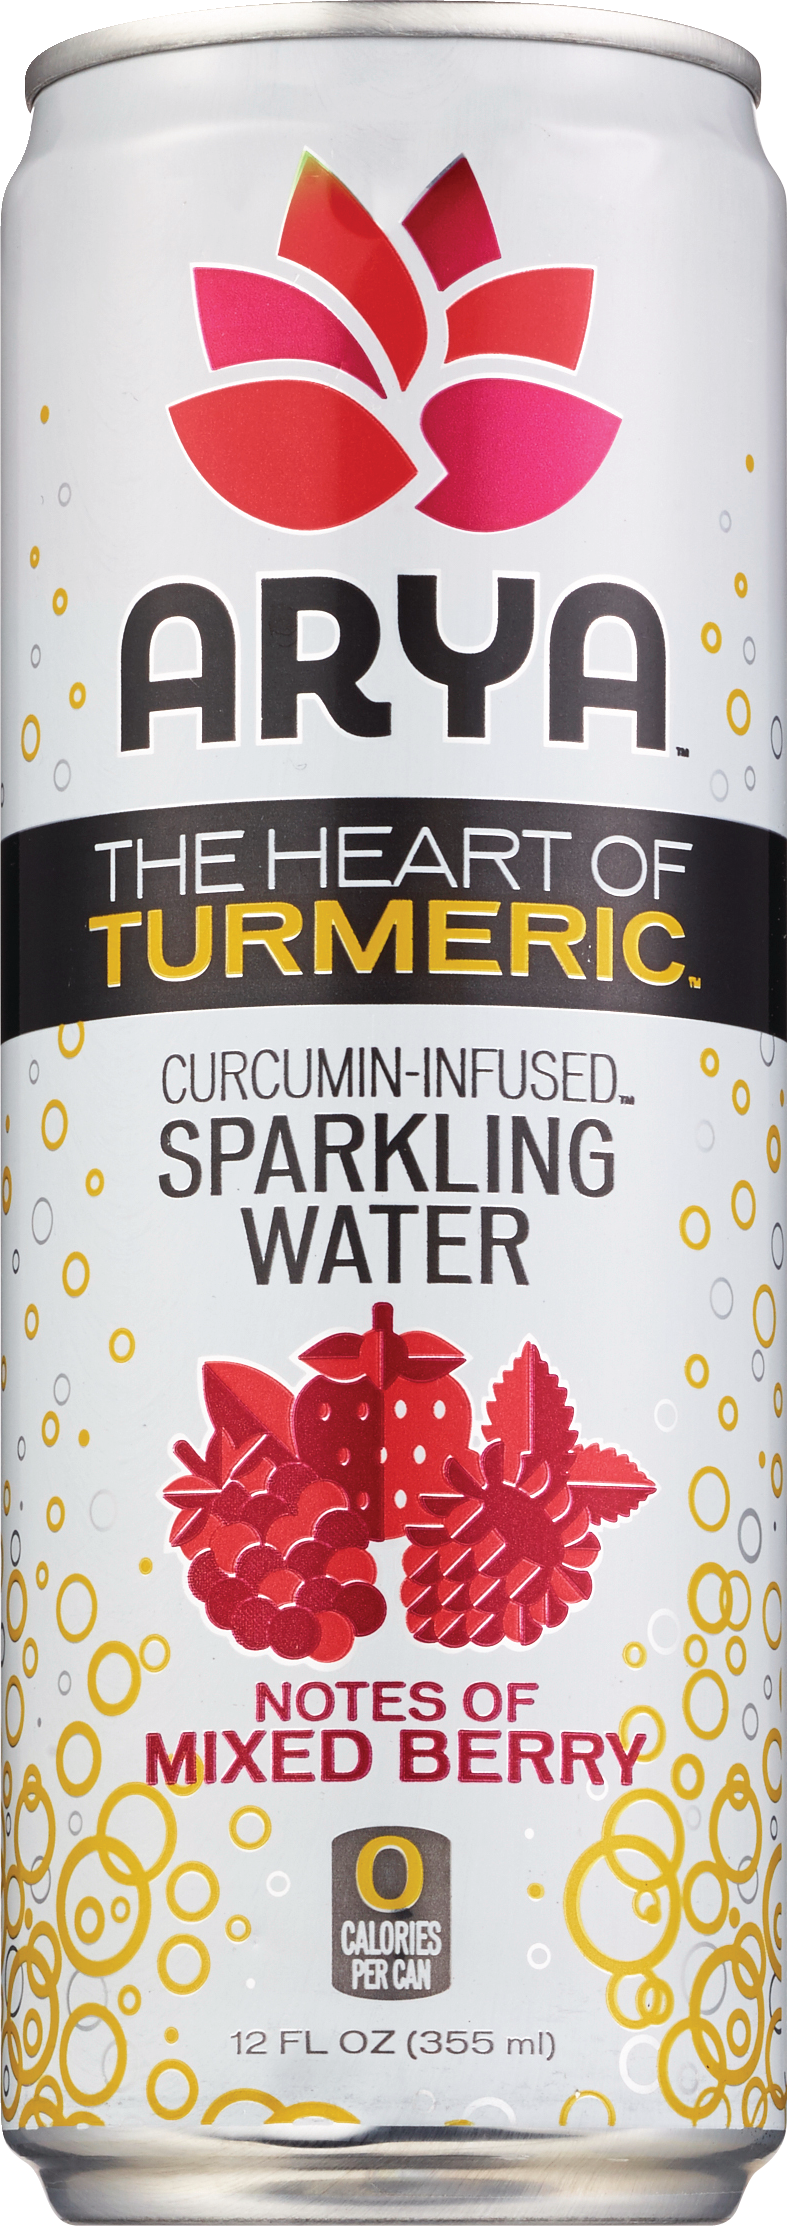 Arya Curcumin-Infused Sparkling Water, Notes of Mixed Berry, 12 oz